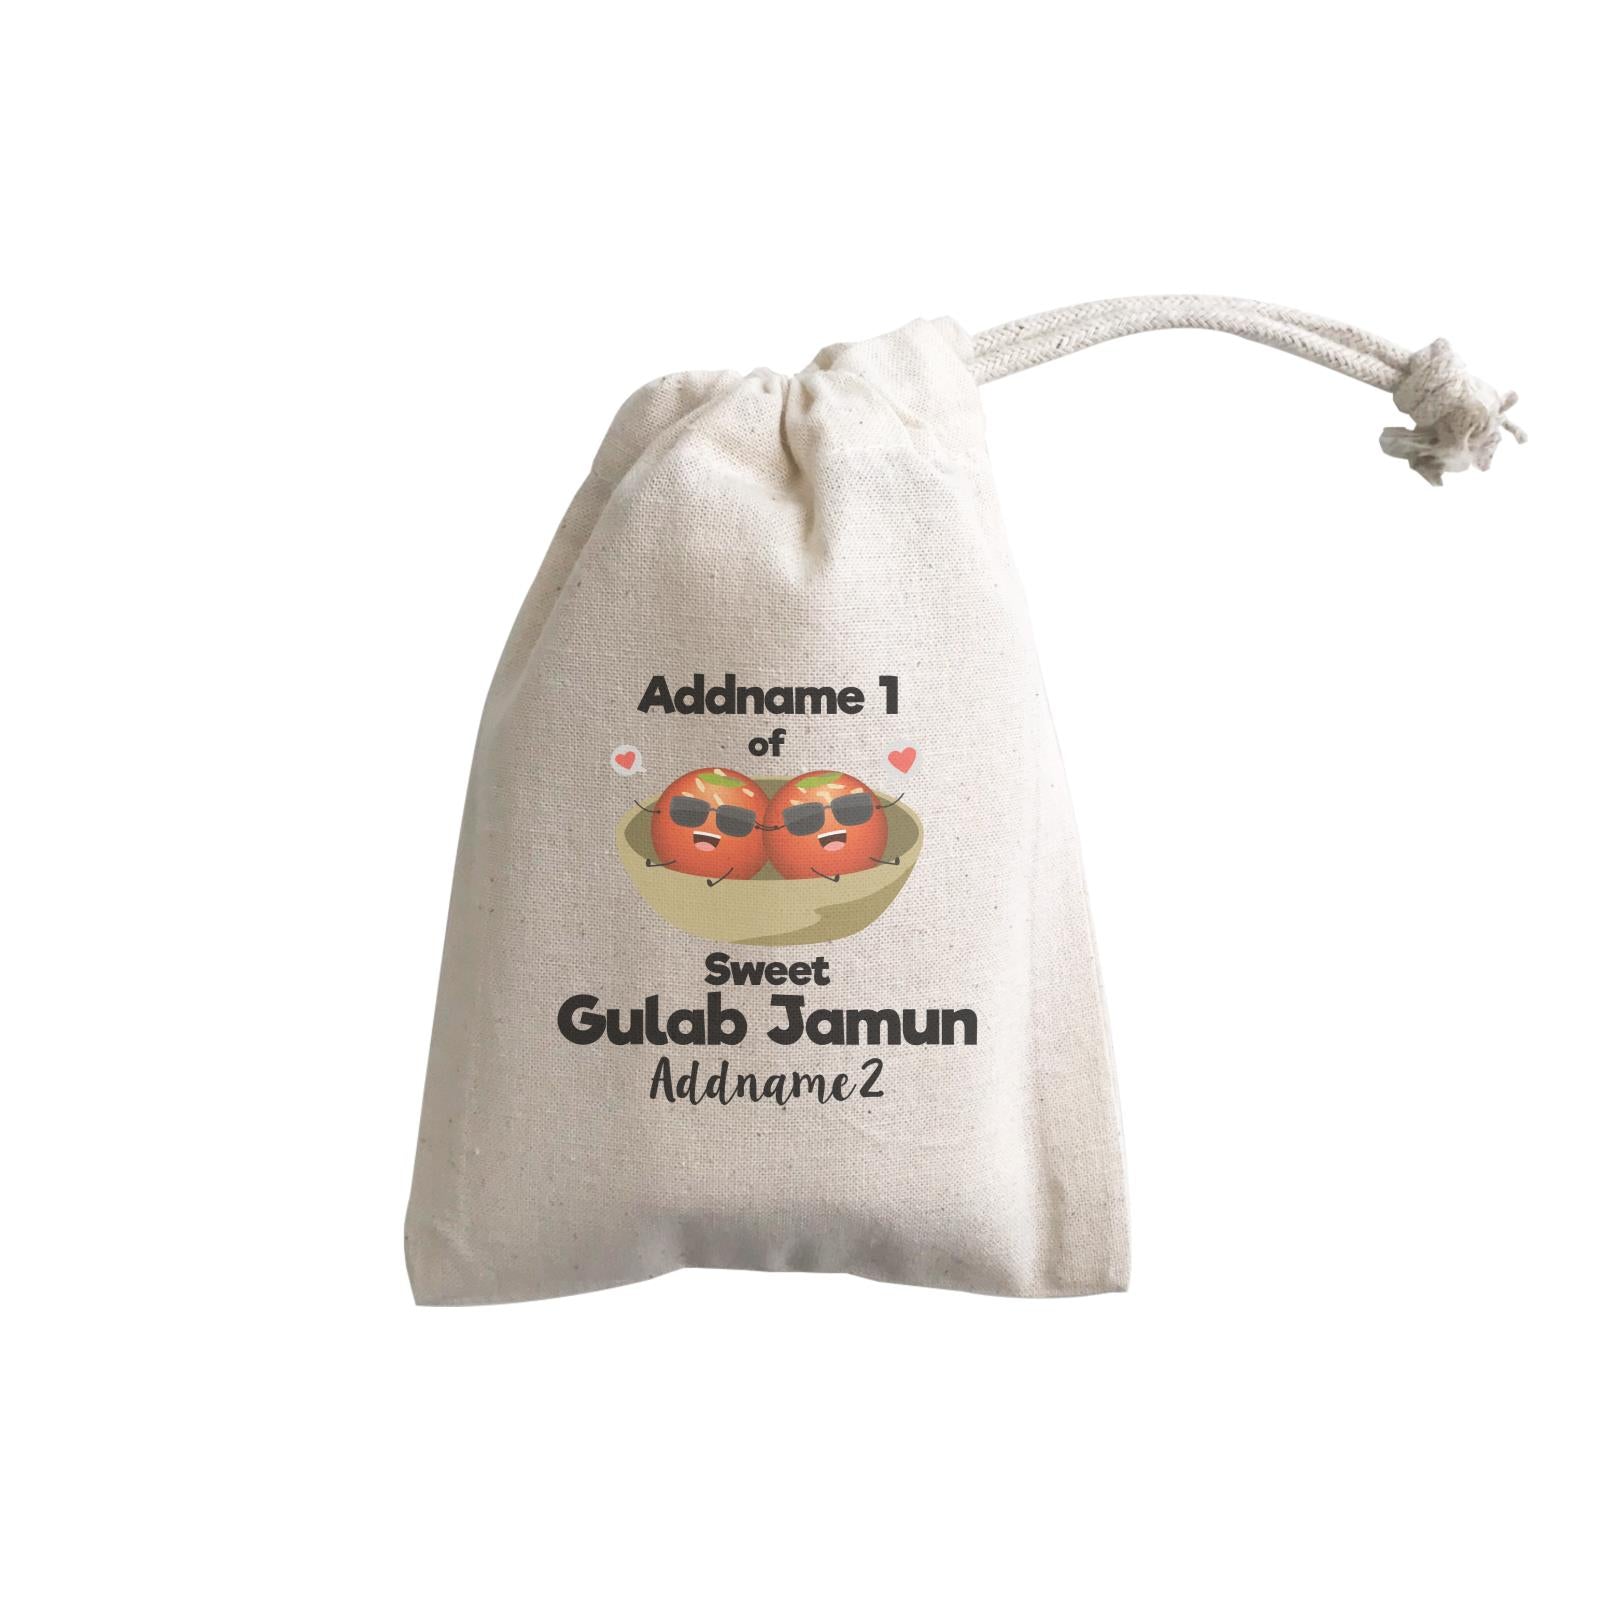 Addname 1 of Sweet Gulab Jamun Addname 2 GP Gift Pouch